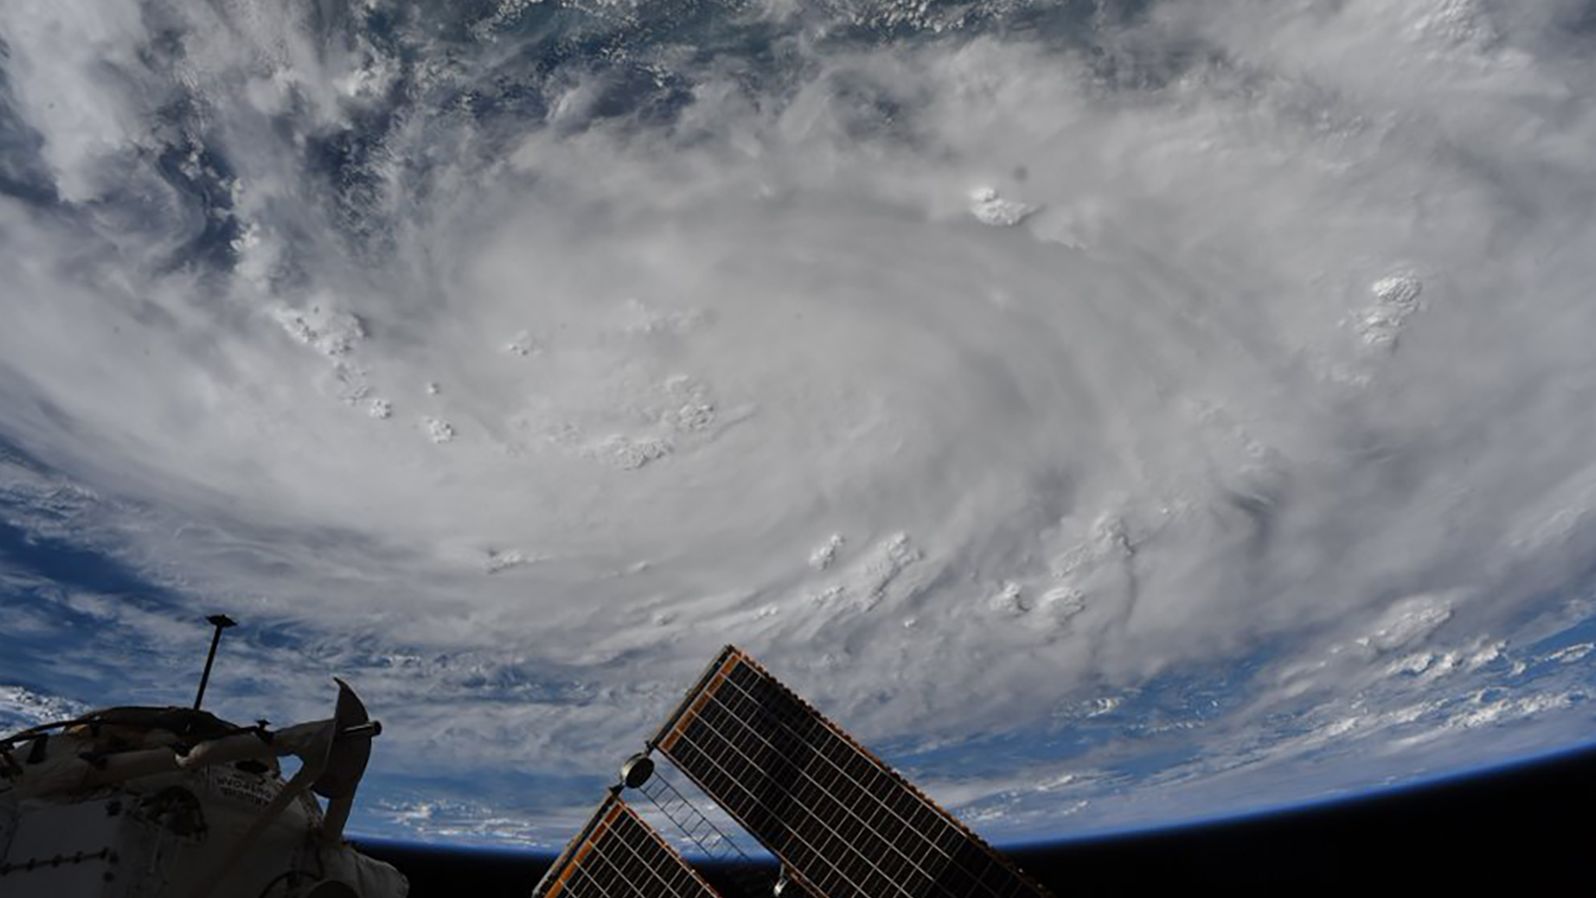 Behnken took this photo of Hurricane Hanna on July 26: "Snapped this photo of the storm in the Gulf of Mexico on Friday as it was starting to have observable structure from @Space_Station."